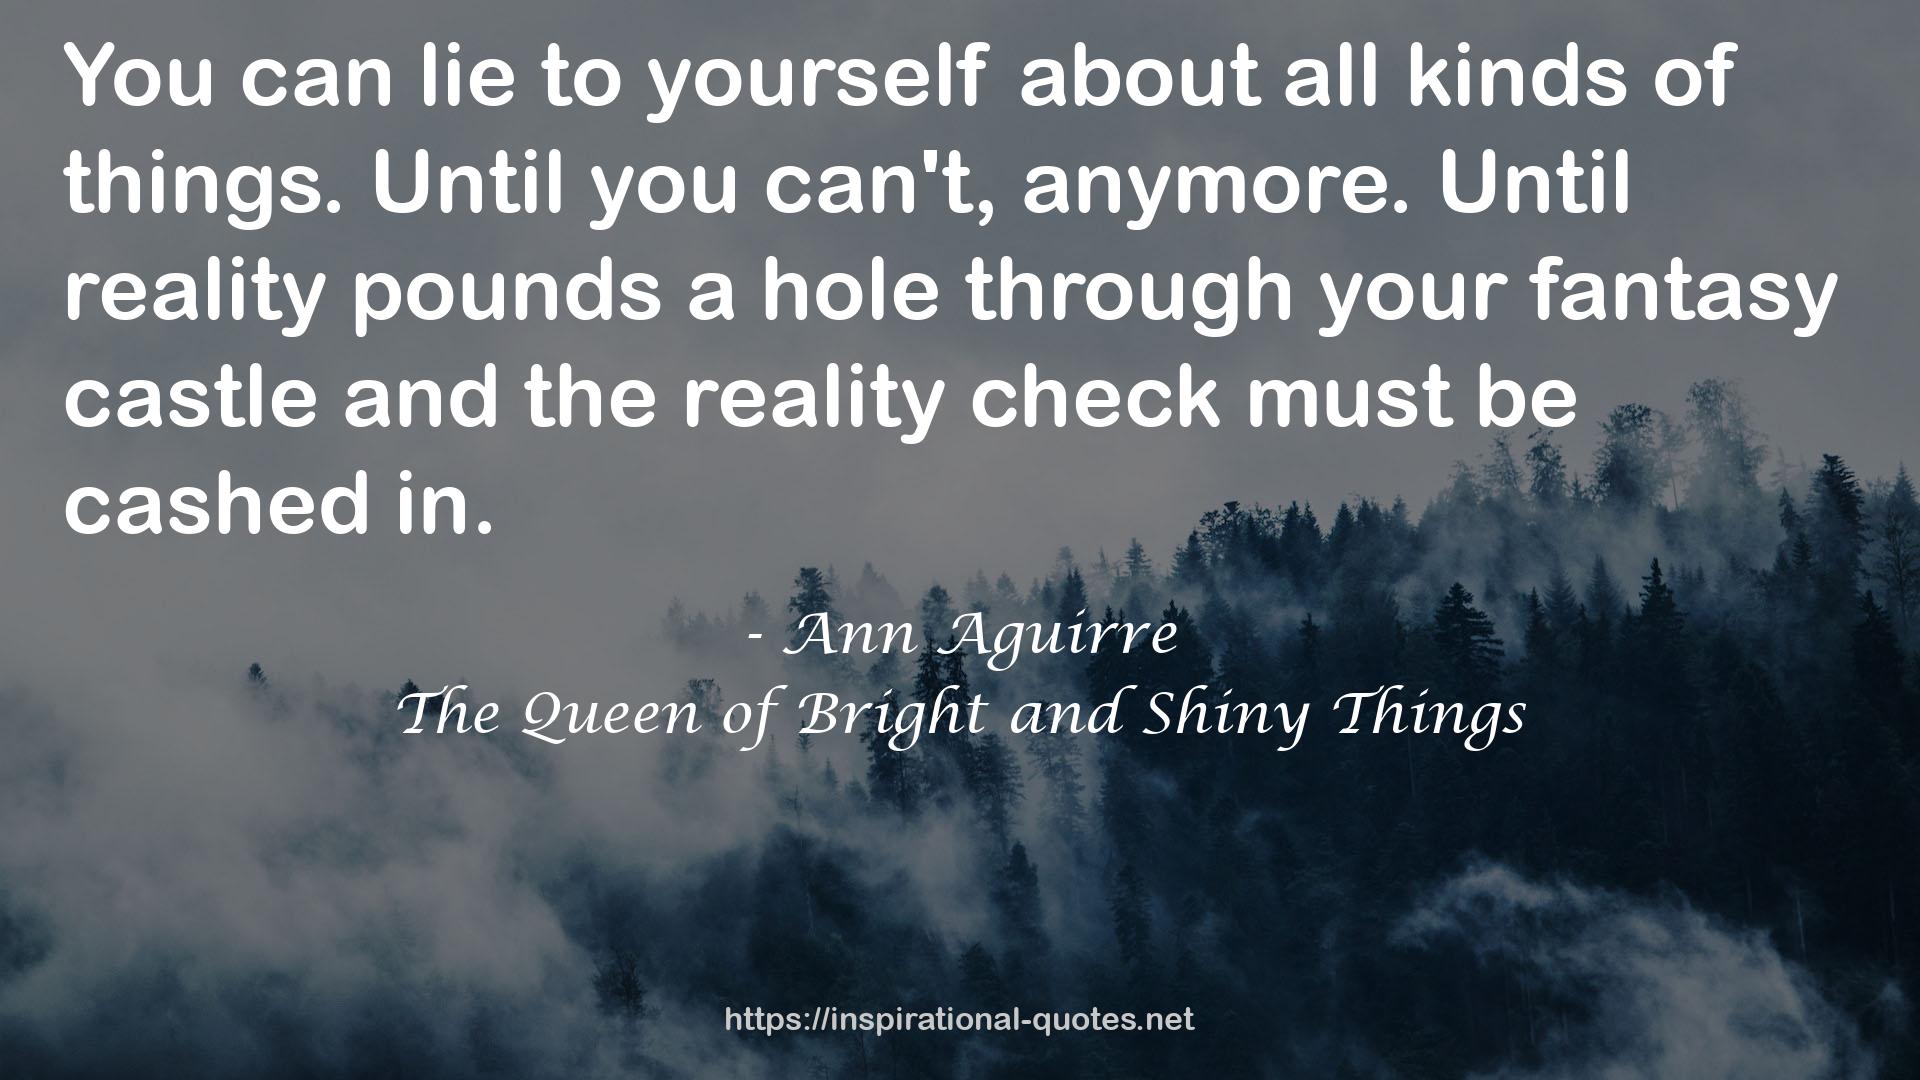 The Queen of Bright and Shiny Things QUOTES